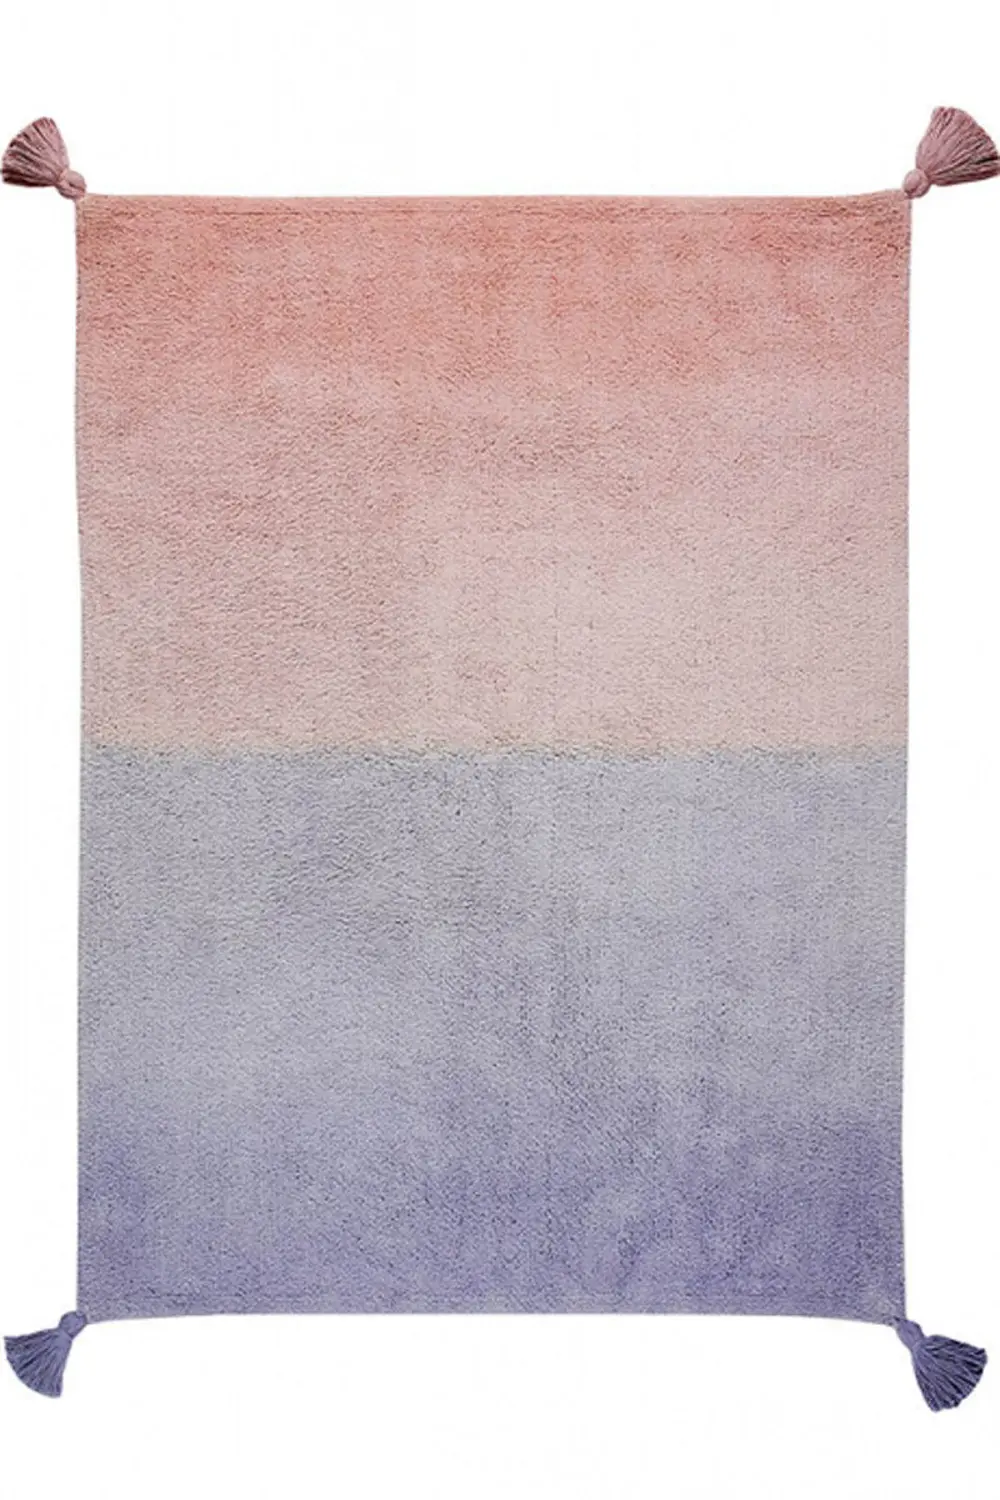 C-DE-PL 4 x 5 Small Ombre Coral Pink and Lavender Washable Rug-1